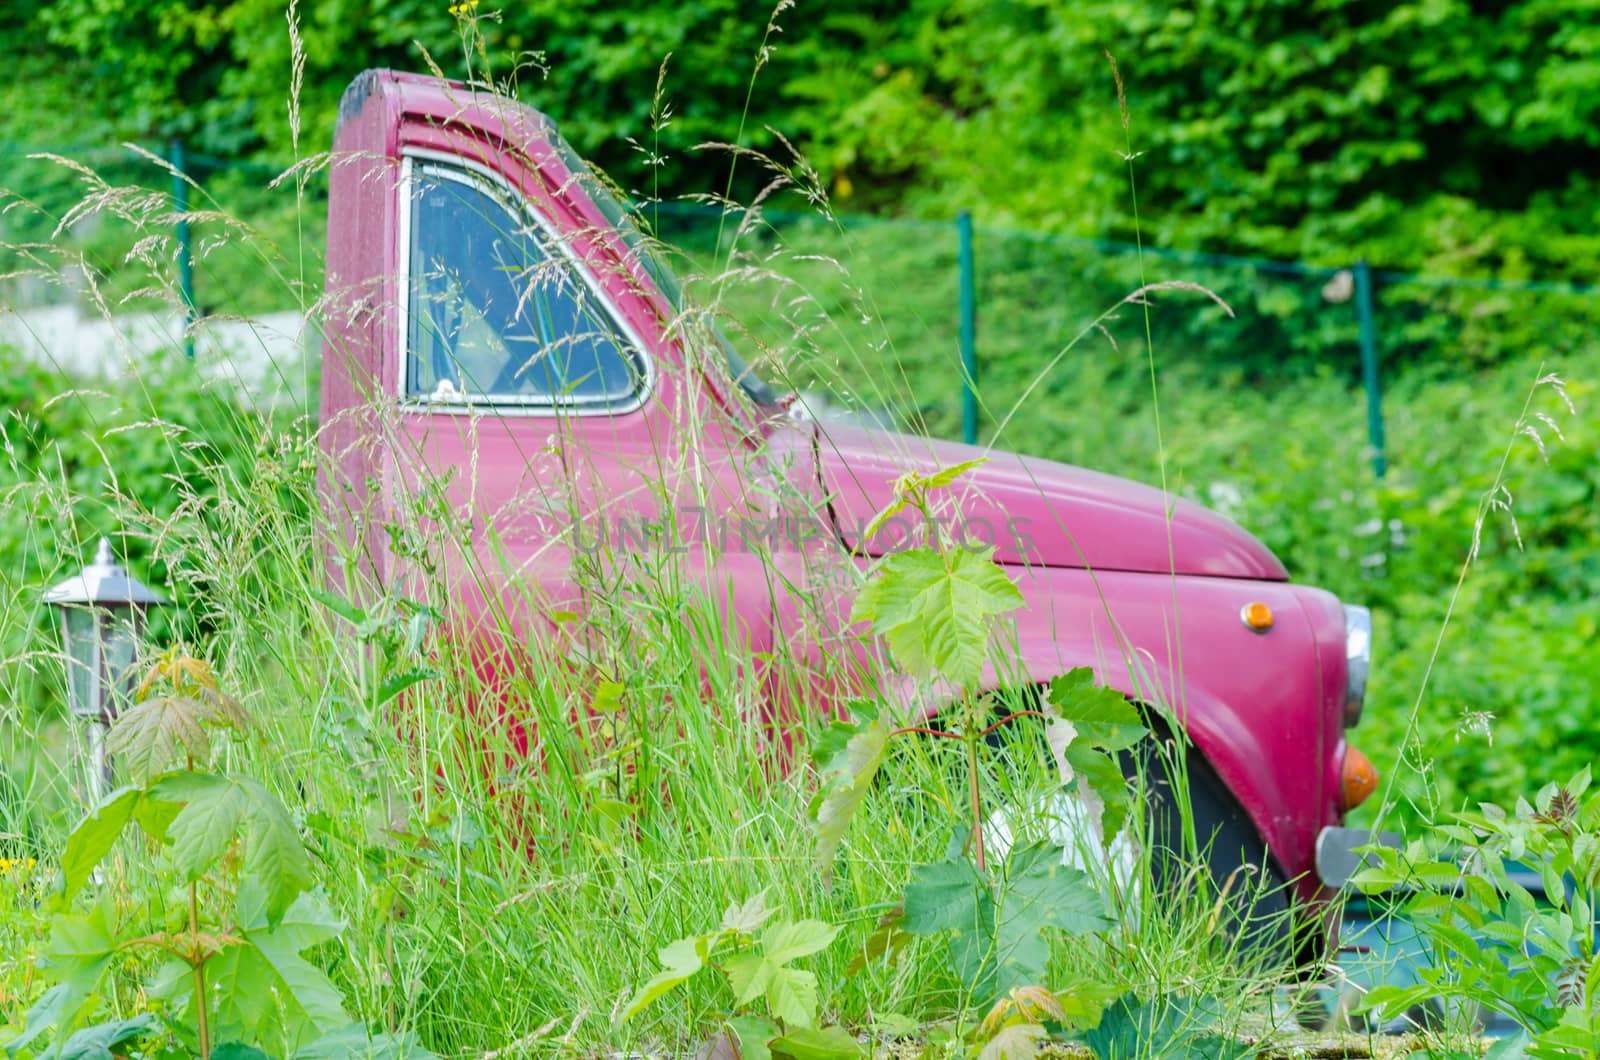 Half car behind the front seats separated by overgrown grass.